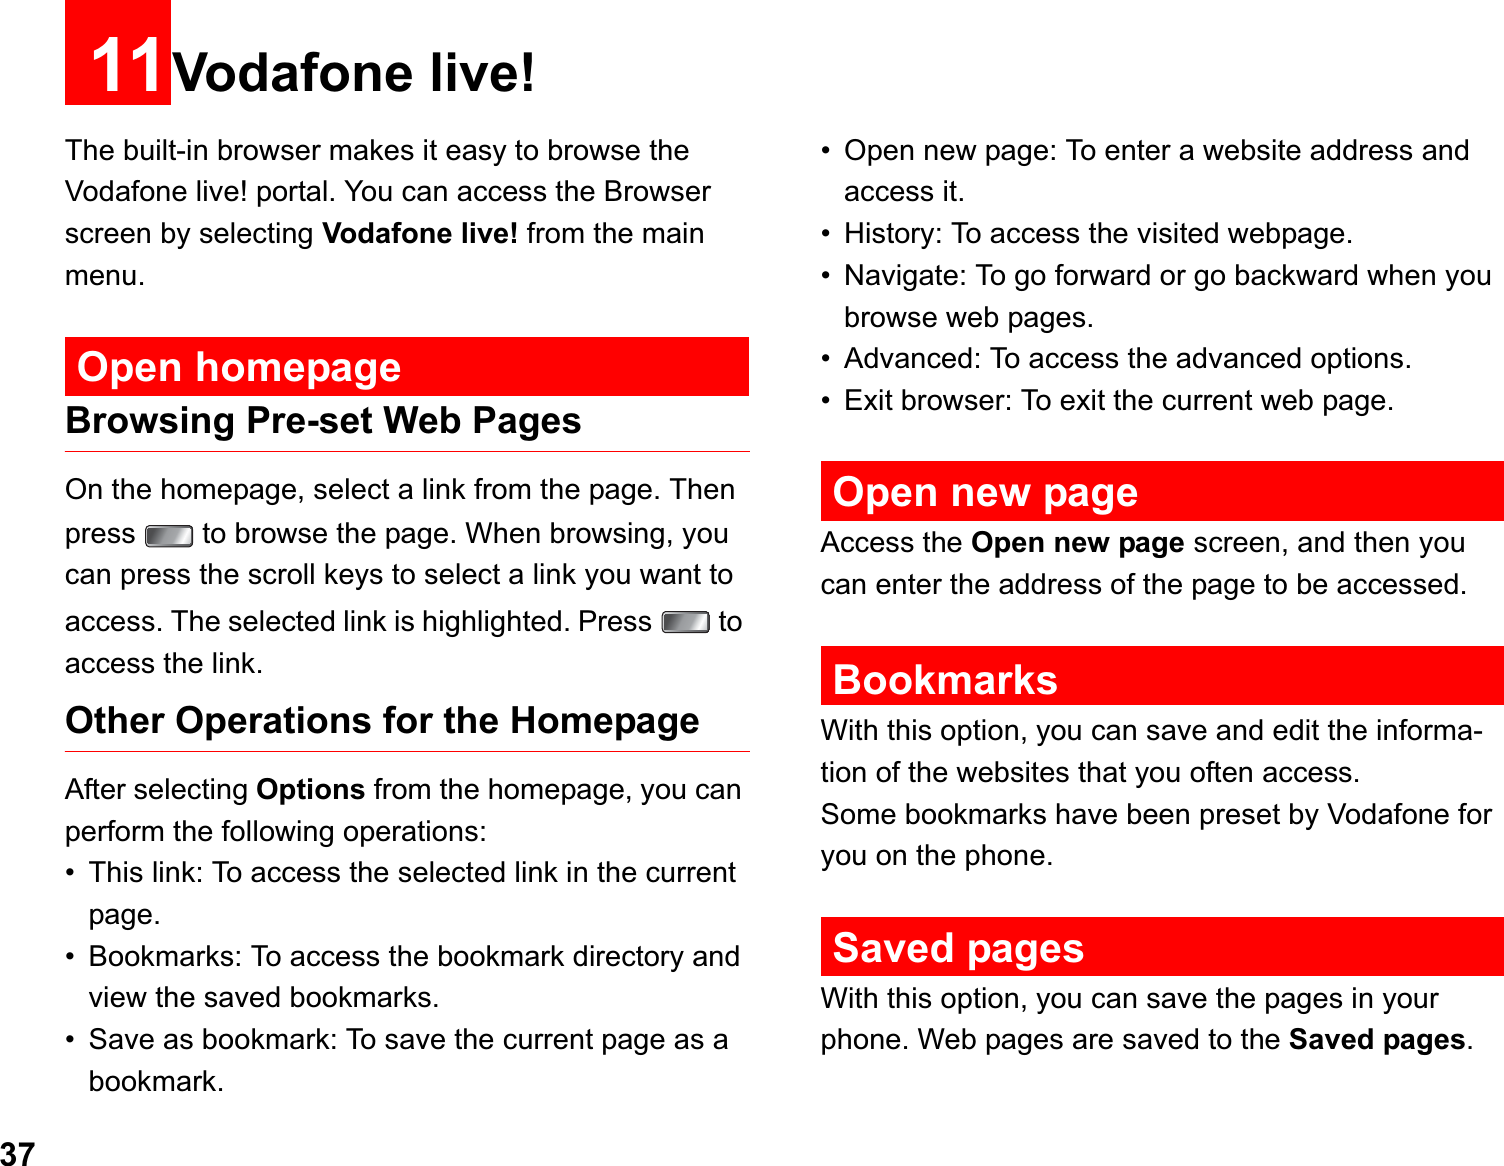 3711Vodafone live!The built-in browser makes it easy to browse the Vodafone live! portal. You can access the Browser screen by selecting Vodafone live! from the main menu.Open homepageBrowsing Pre-set Web PagesOn the homepage, select a link from the page. Then press   to browse the page. When browsing, you can press the scroll keys to select a link you want to access. The selected link is highlighted. Press   to access the link.Other Operations for the HomepageAfter selecting Options from the homepage, you can perform the following operations:• This link: To access the selected link in the current page.• Bookmarks: To access the bookmark directory and view the saved bookmarks.• Save as bookmark: To save the current page as a bookmark.• Open new page: To enter a website address and access it.• History: To access the visited webpage.• Navigate: To go forward or go backward when you browse web pages.• Advanced: To access the advanced options.• Exit browser: To exit the current web page.Open new pageAccess the Open new page screen, and then you can enter the address of the page to be accessed. BookmarksWith this option, you can save and edit the informa-tion of the websites that you often access.Some bookmarks have been preset by Vodafone for you on the phone.Saved pagesWith this option, you can save the pages in your phone. Web pages are saved to the Saved pages.